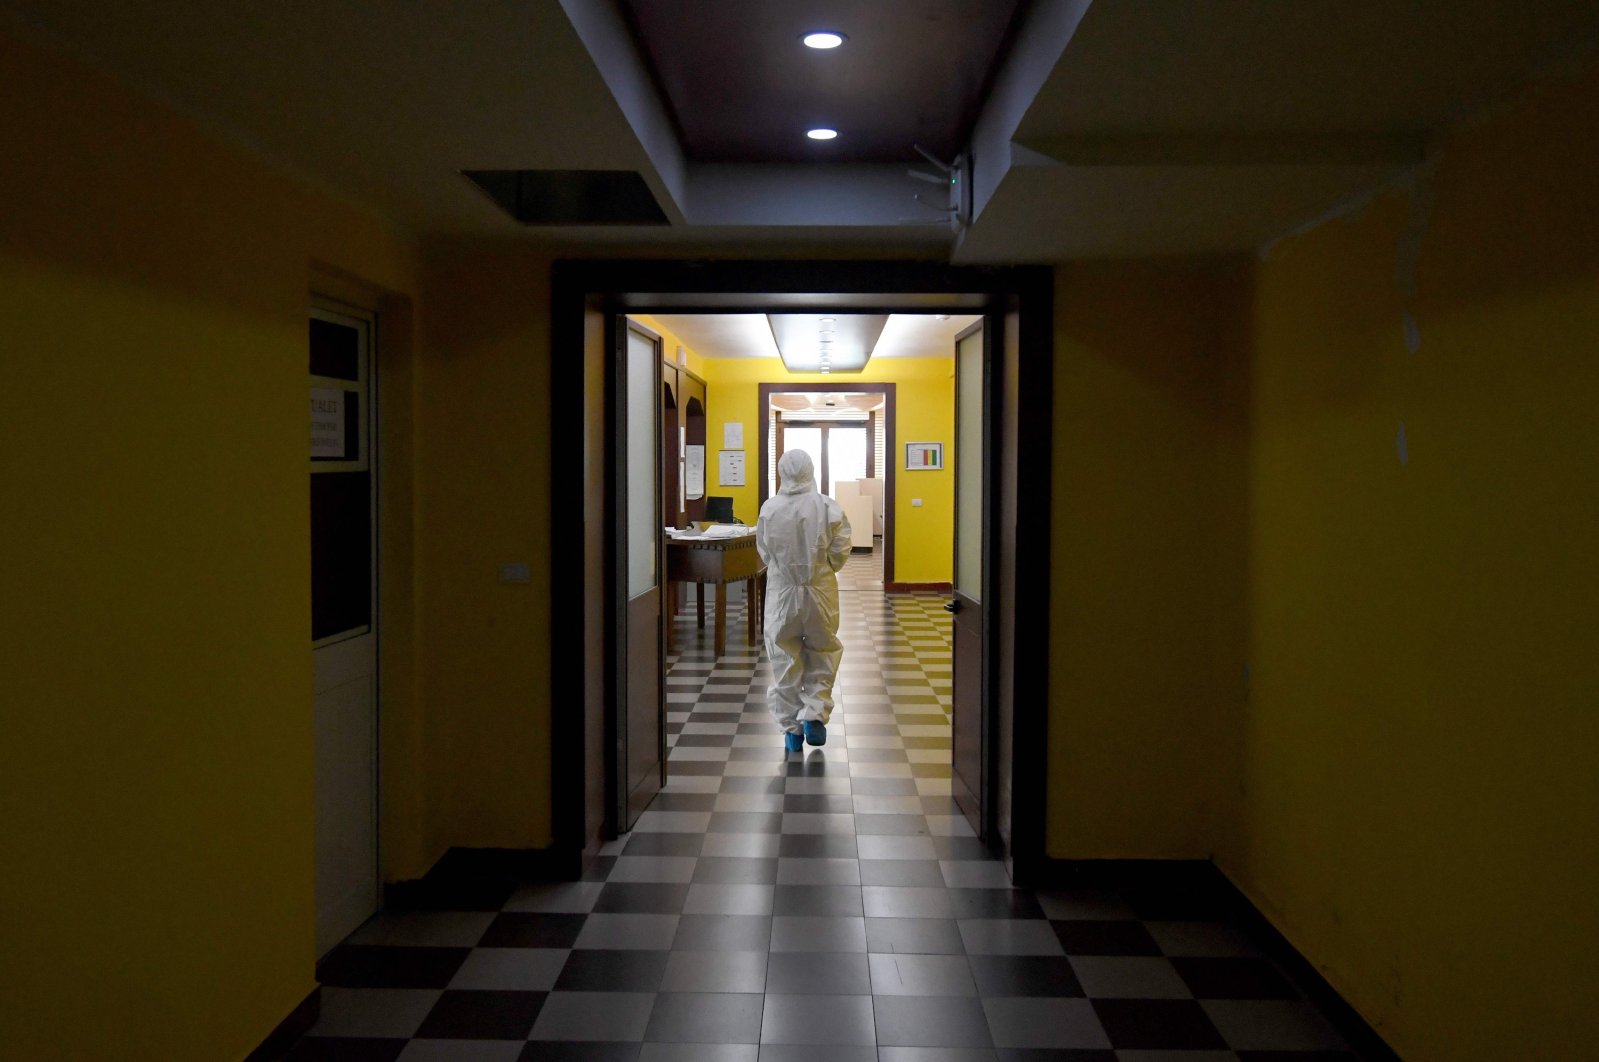 A medical worker walks through a corridor at the Shefqet Ndroqi Sanatorium hospital converted to receive patients infected with COVID-19 in Tirana, Albania, April 30, 2020. (AFP Photo)